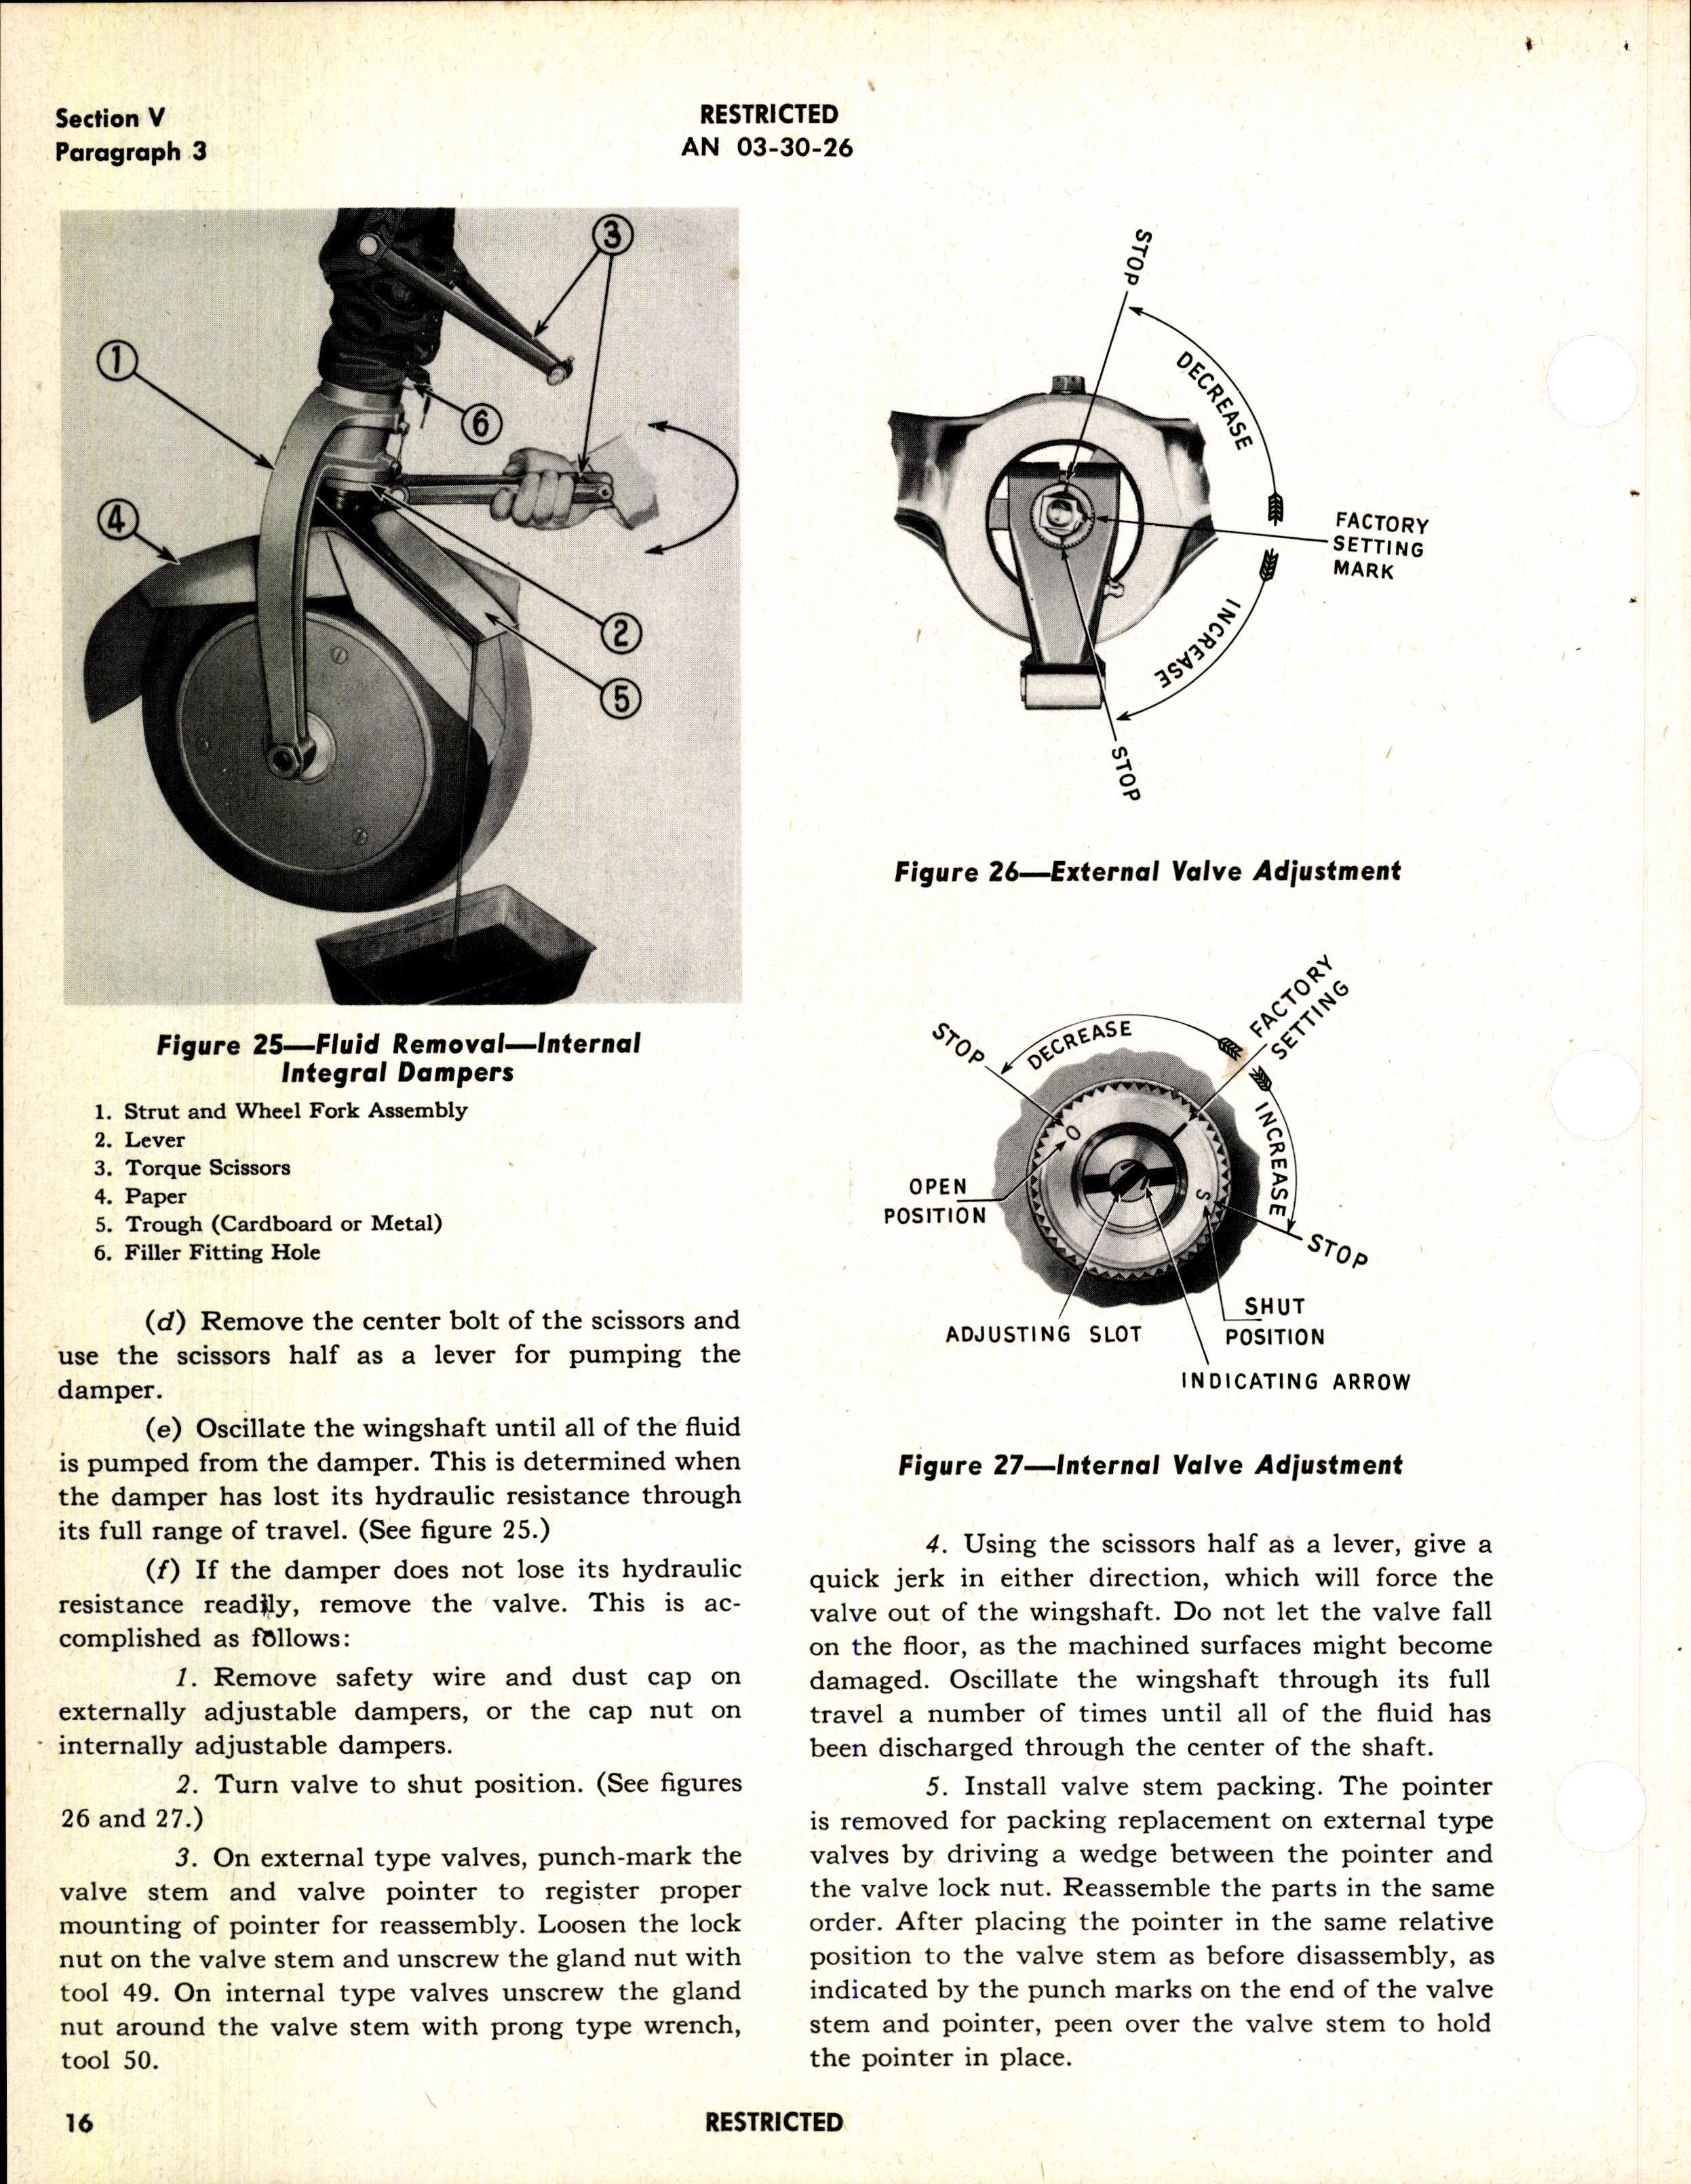 Sample page 44 from AirCorps Library document: Operation, Service, and Overhaul Instructions with Parts Catalog for Shimmy Dampers